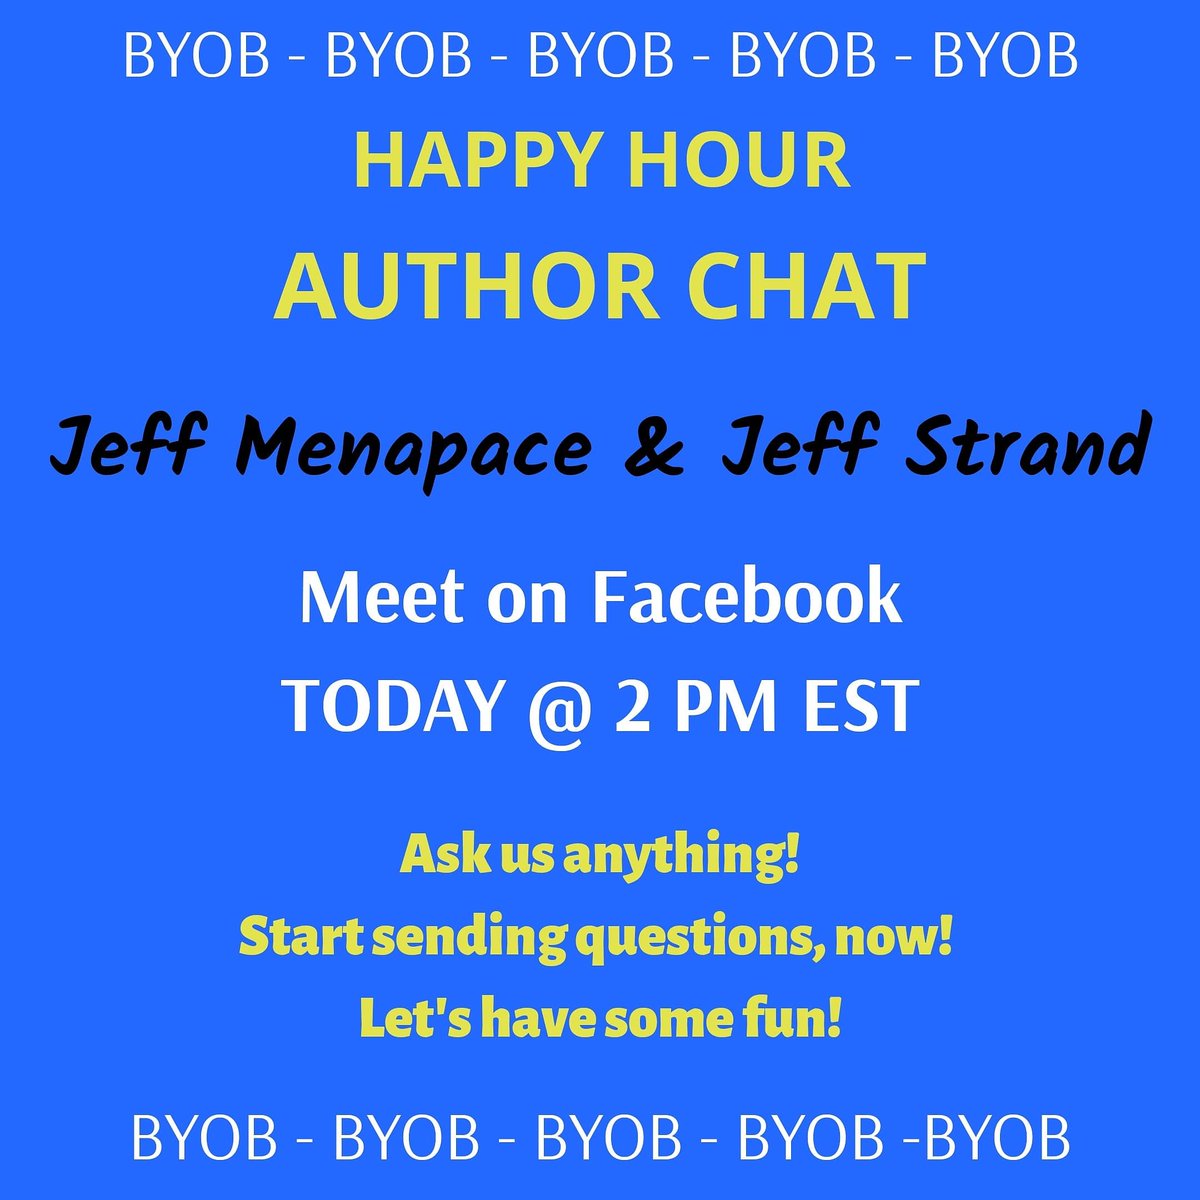 Join @JeffStrand and me at facebook.com/JeffMenapace.w… for another #HappyHour #AuthorChat and #bookgiveaways !! 
Start sending questions now by private message, posting in comments, or during #FacebookLive   
.
. 
#QuarantineLife #WritingCommunity #bloggerswanted #book #giveaways